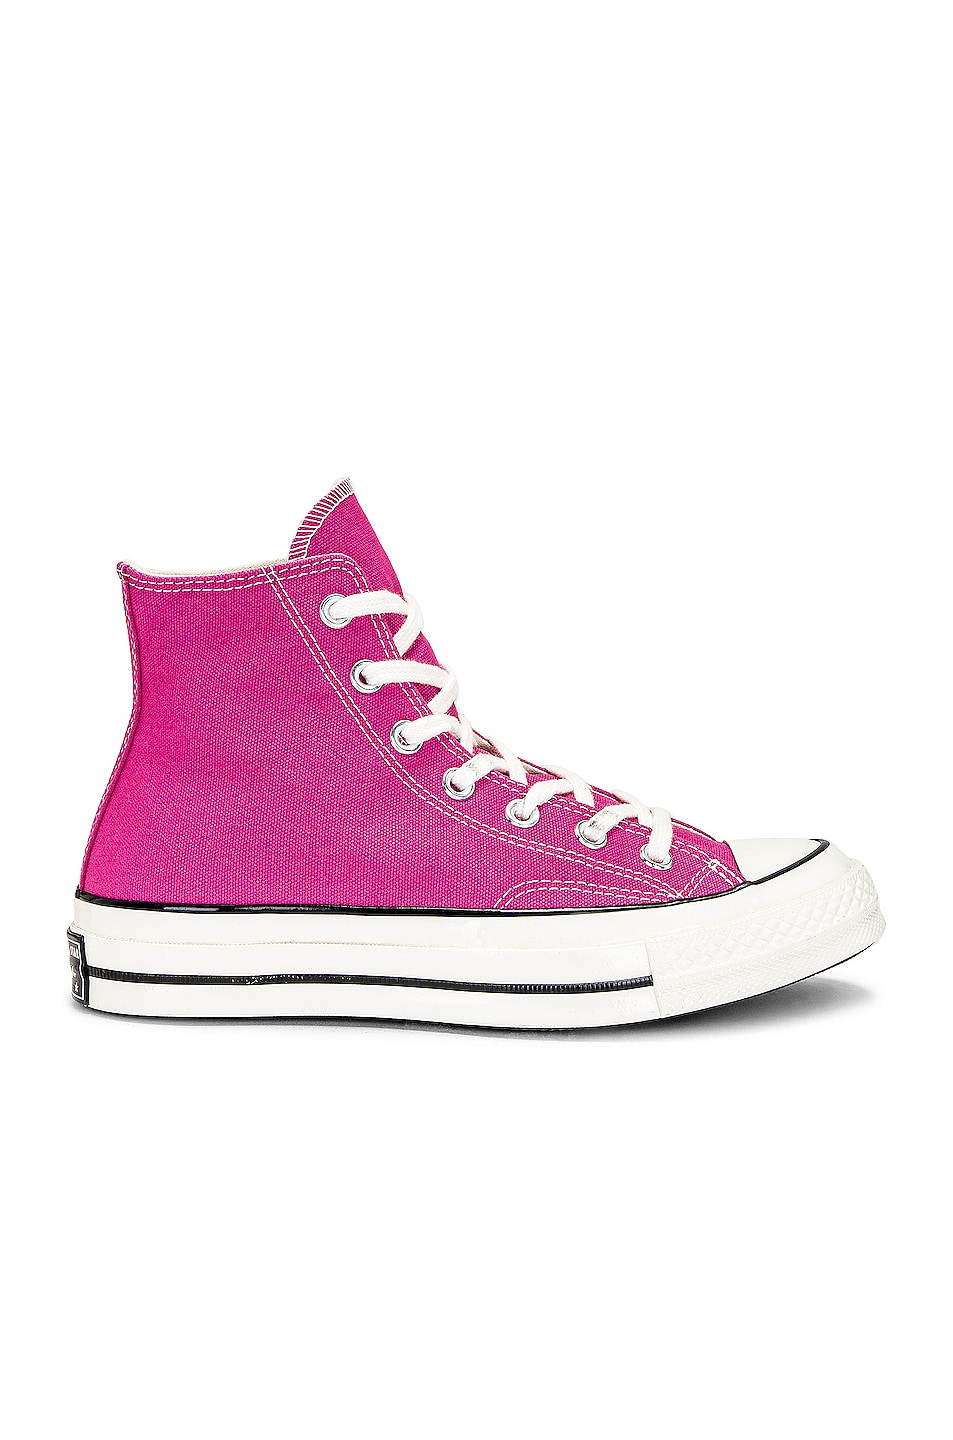 Converse Chuck 70 High Tops In Lucky Pink Egret And Black Fwrd